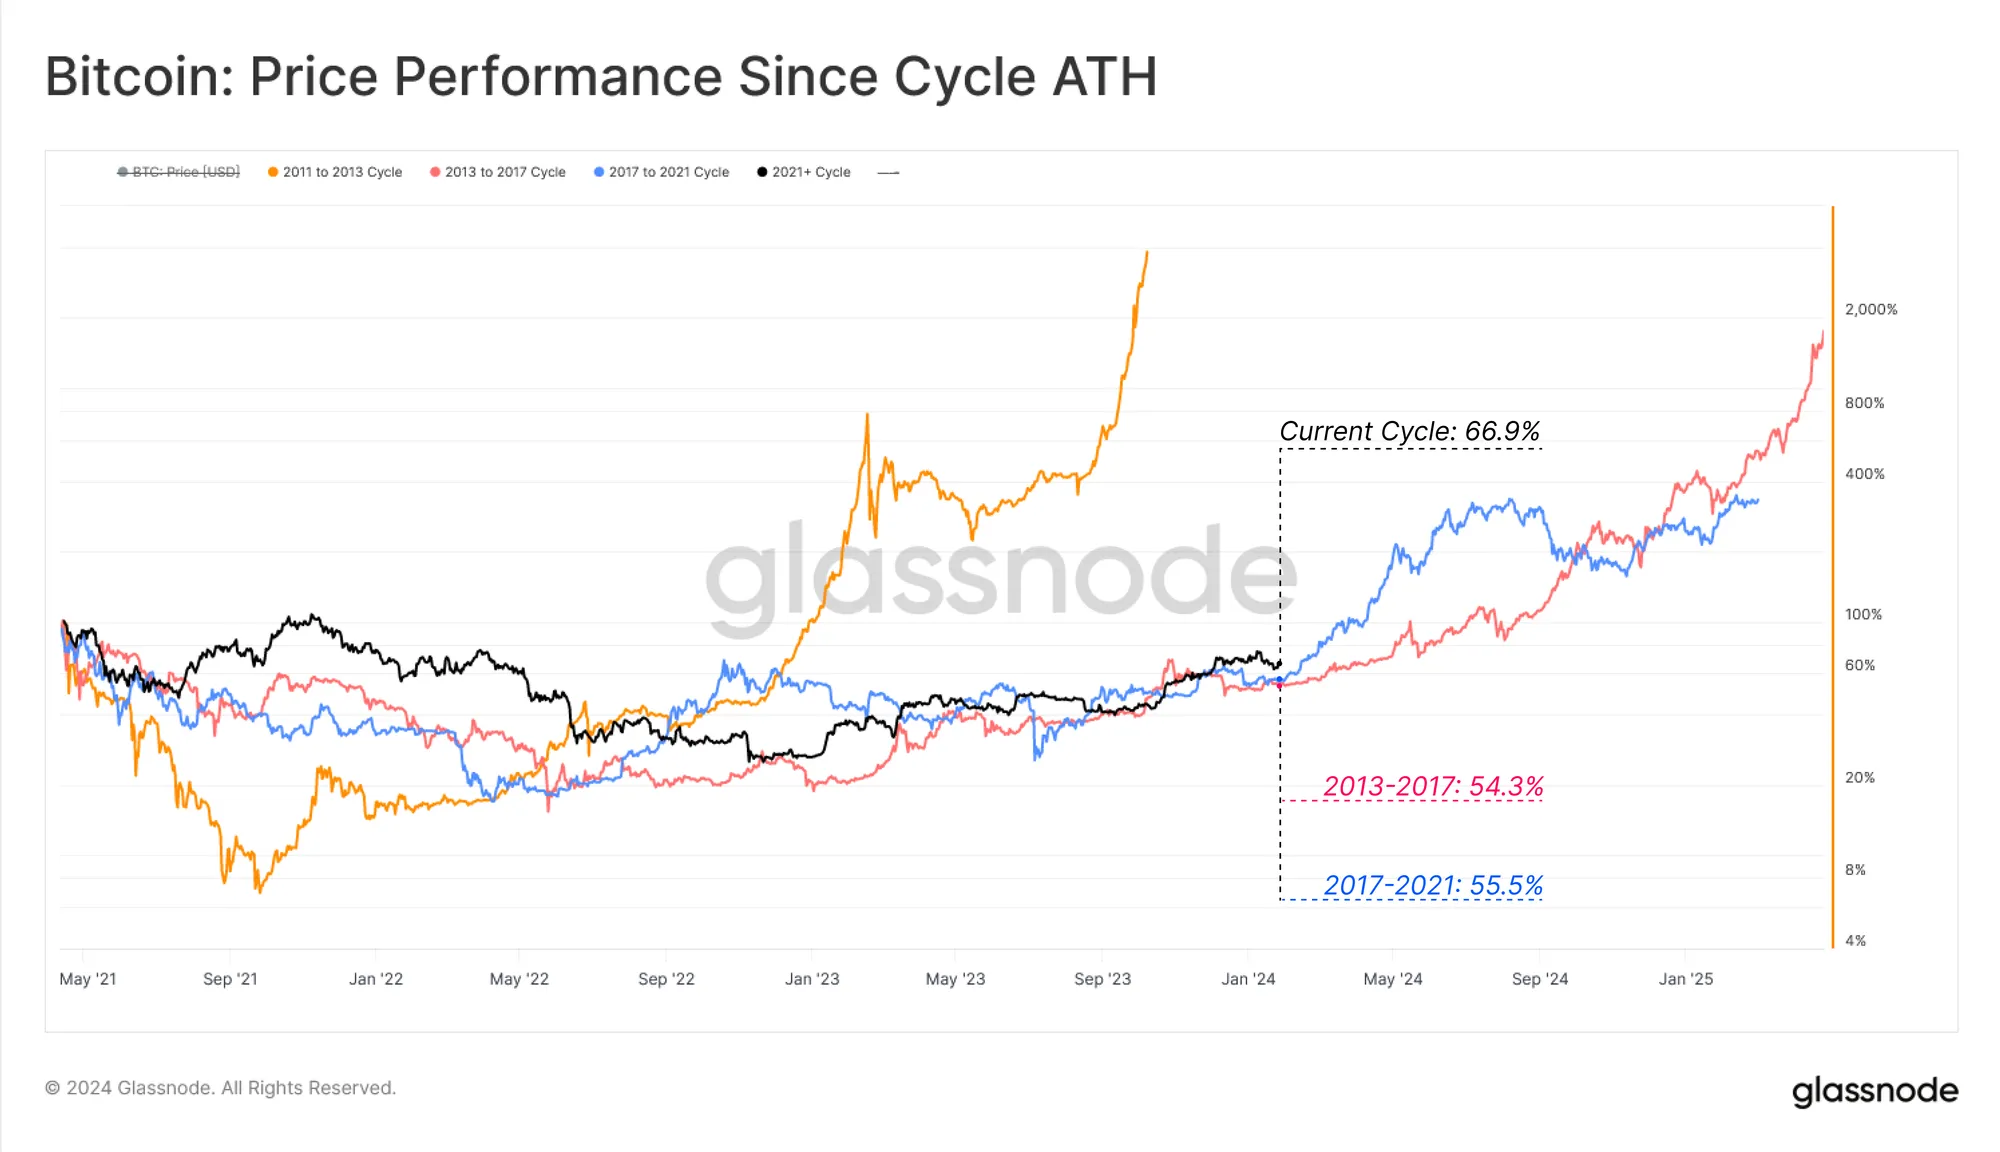 past bitcoin bull cycles overlaid with current cycle btc price